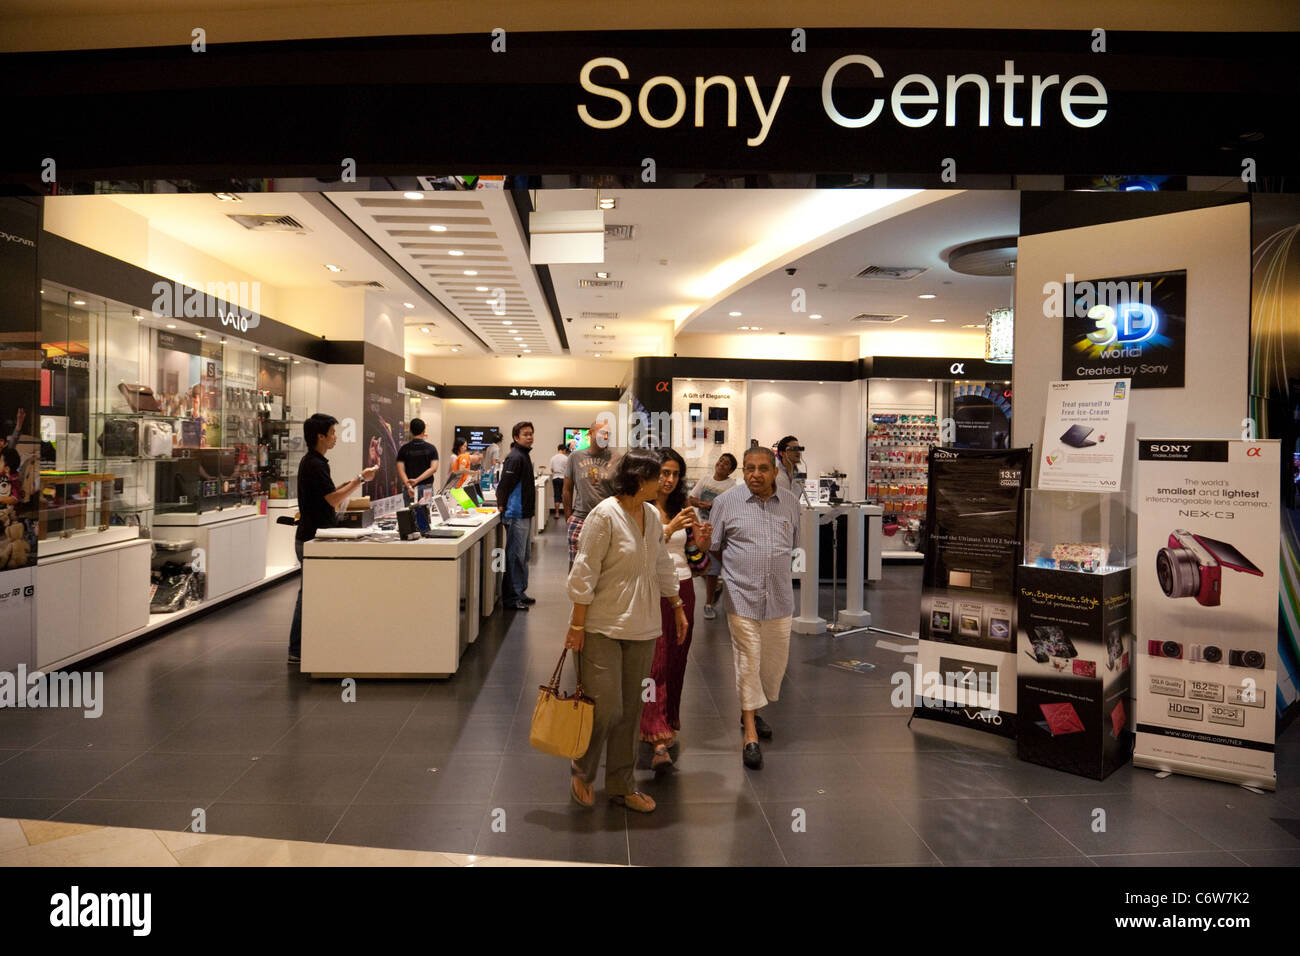 Customers at the Sony Centre, Ion shopping mall, Singapore Asia Stock Photo